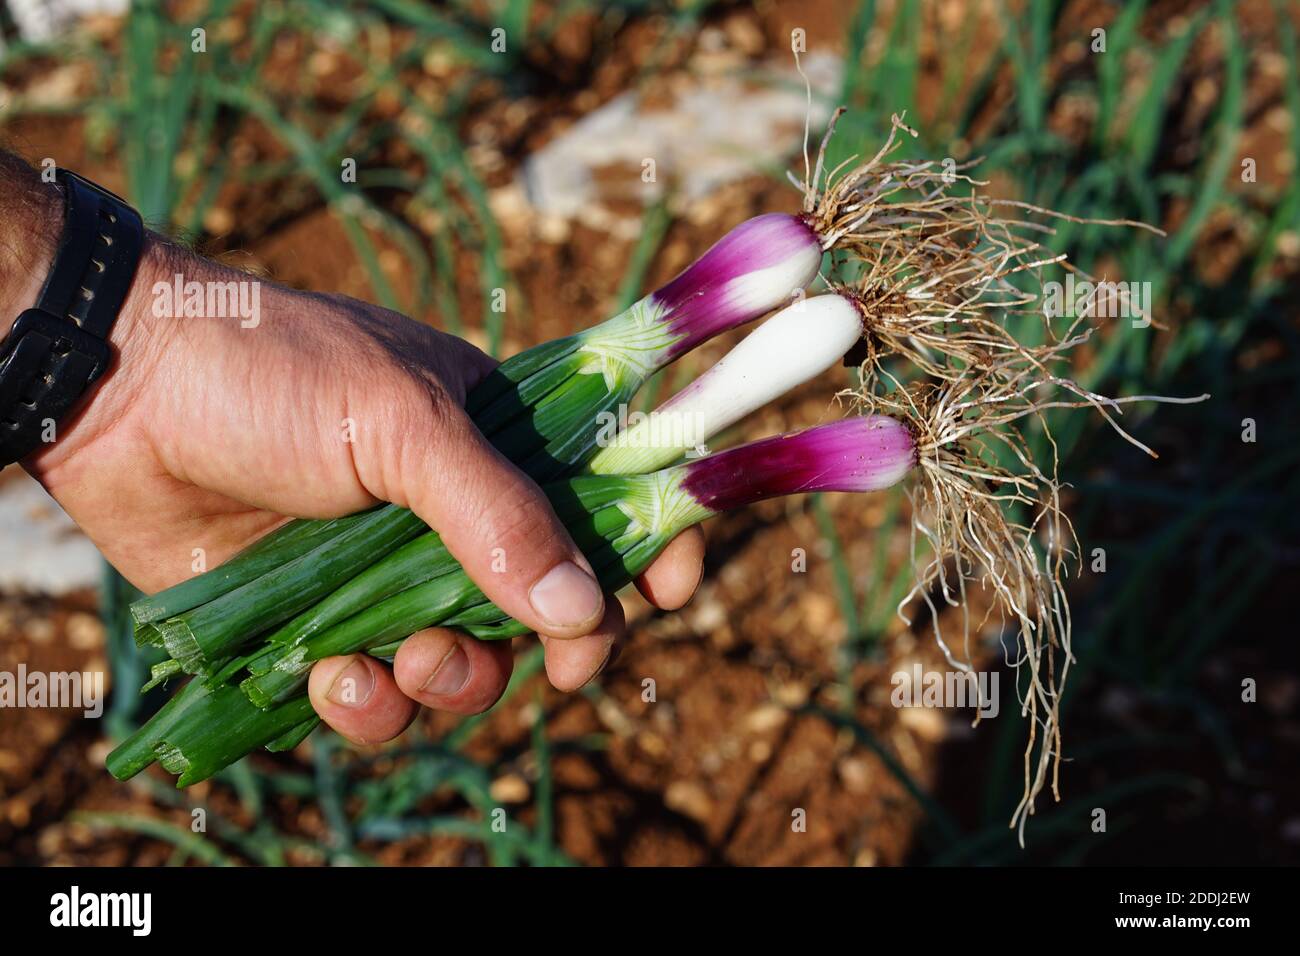 Red onion Stock Photo